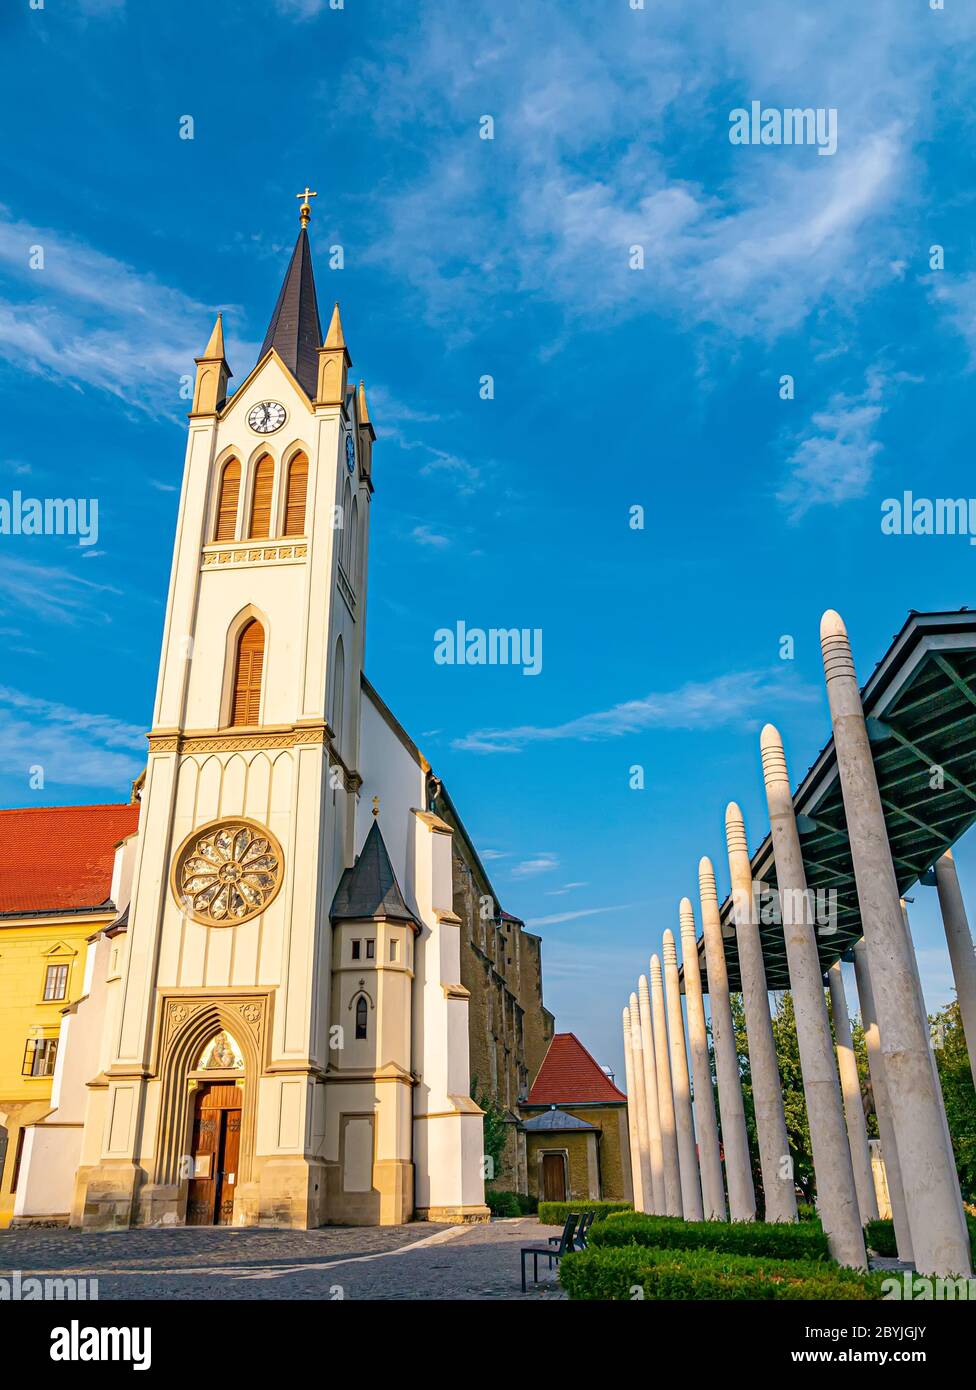 View on the Church of Our Lady Magyarok Nagyasszonya Templom in Keszthely, Hungary Stock Photo